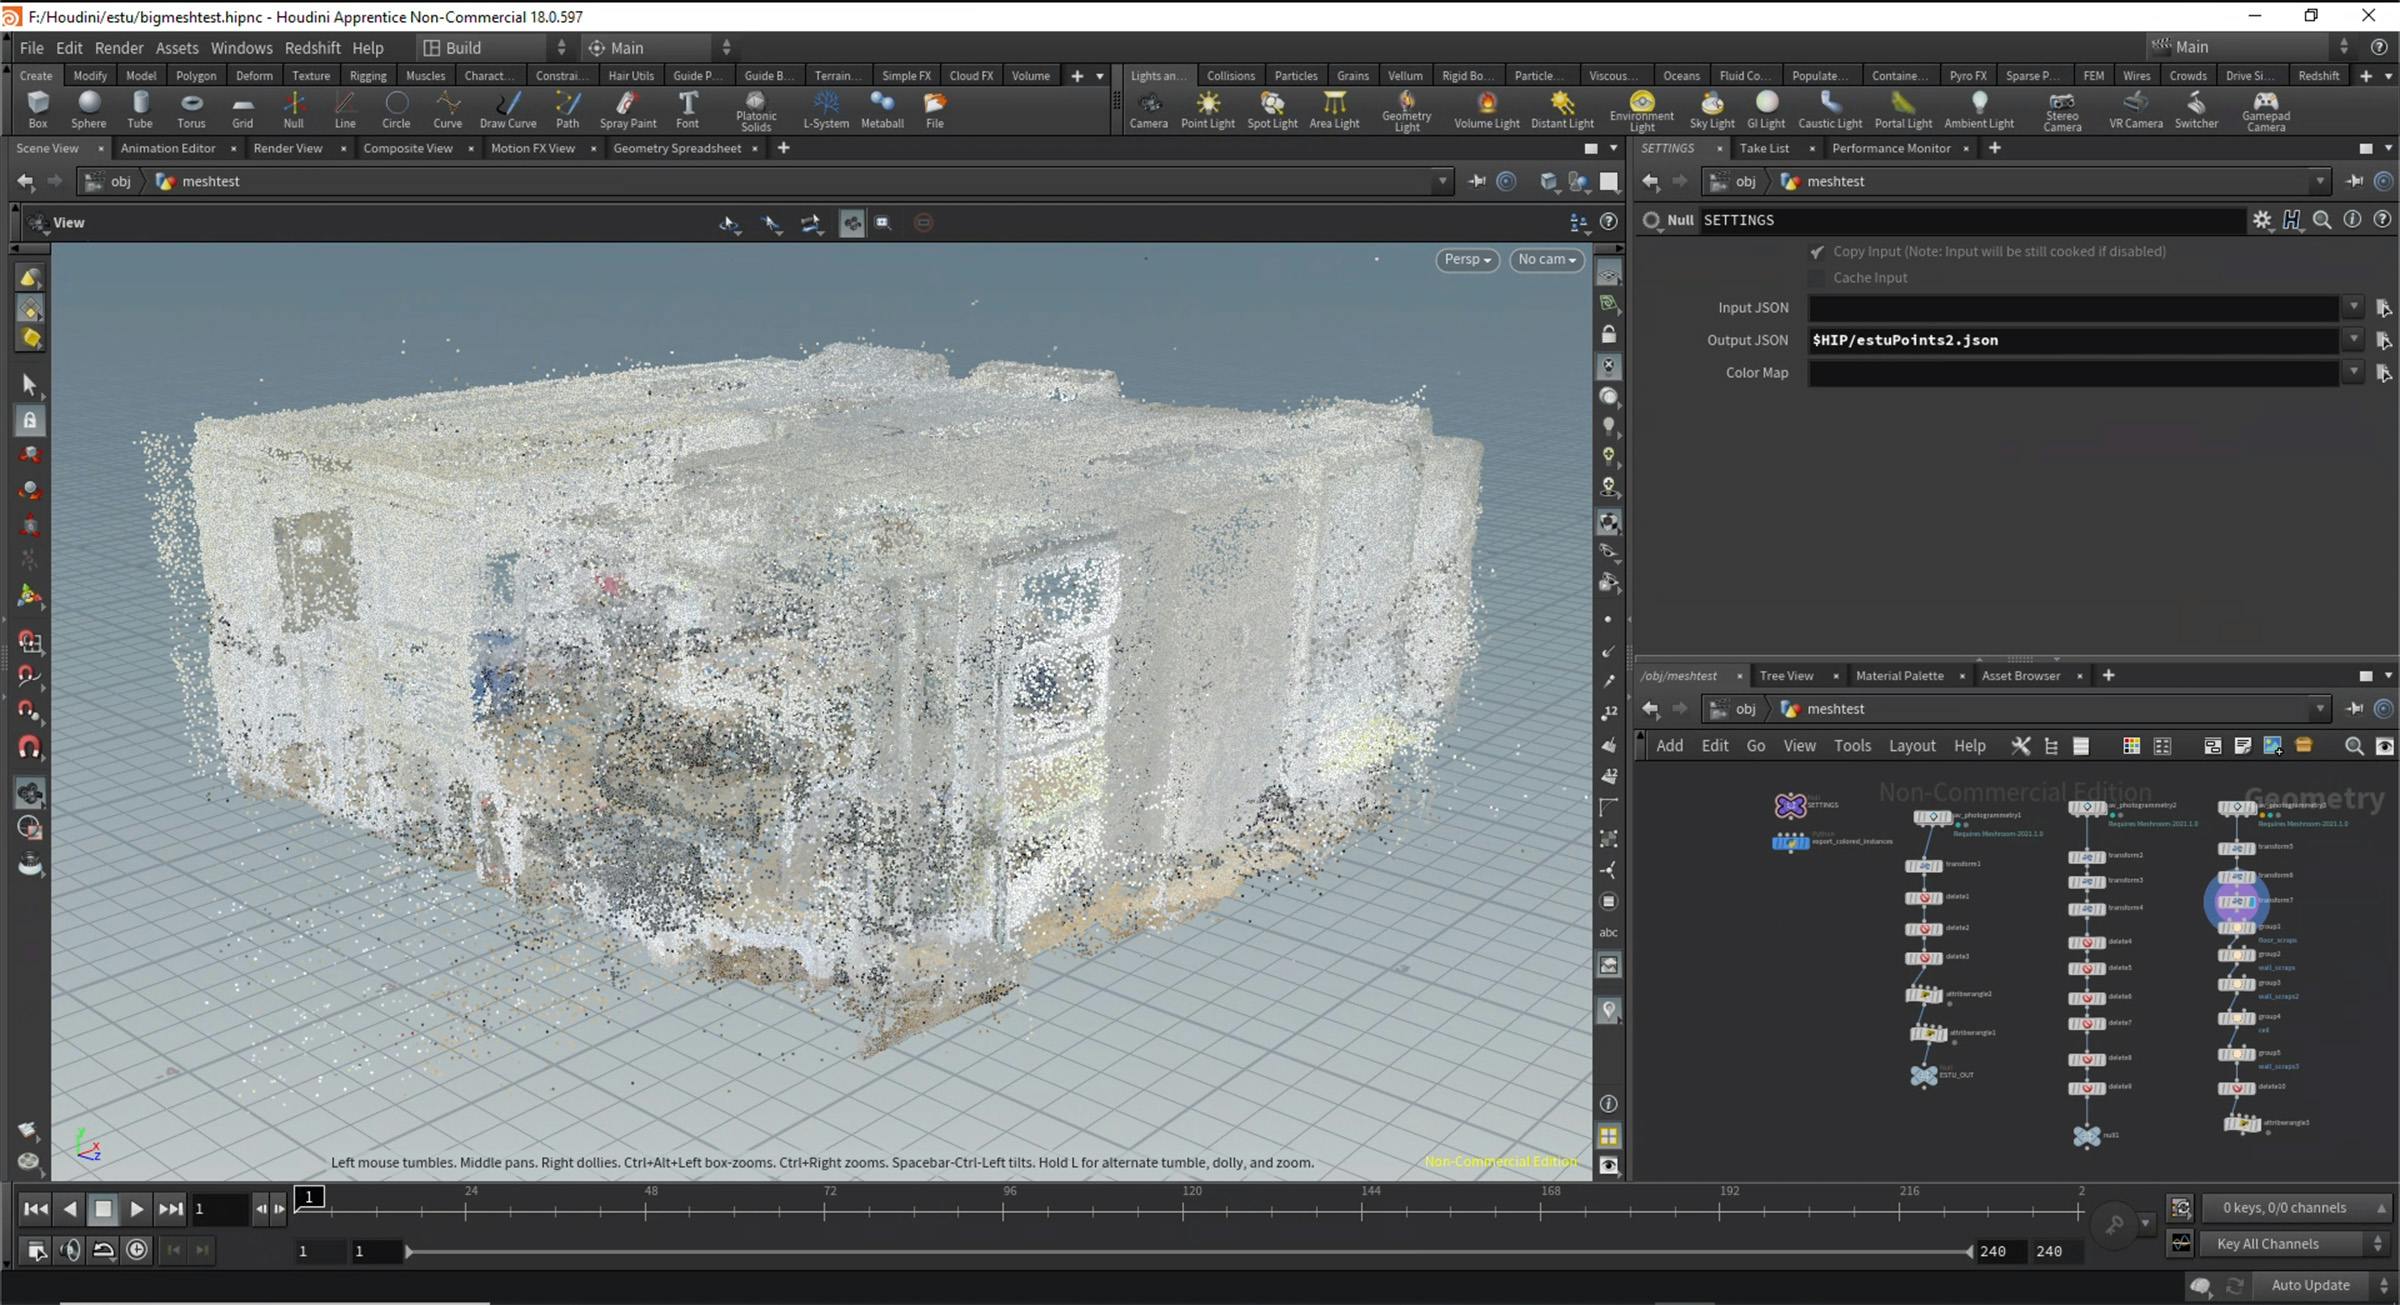 Generated point cloud of the studio in Houdini.